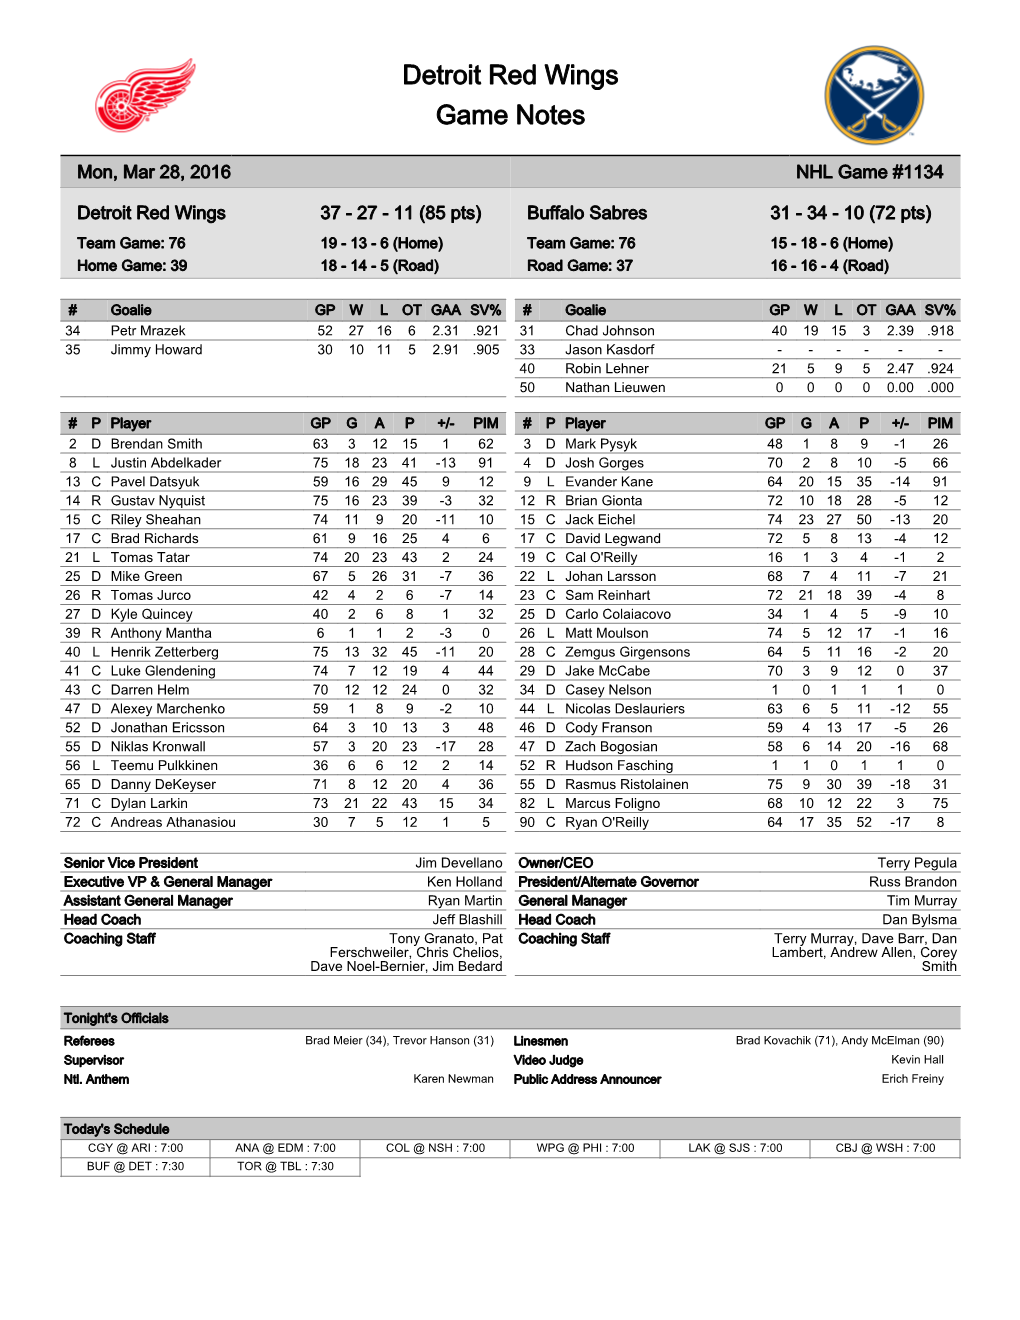 Detroit Red Wings Game Notes